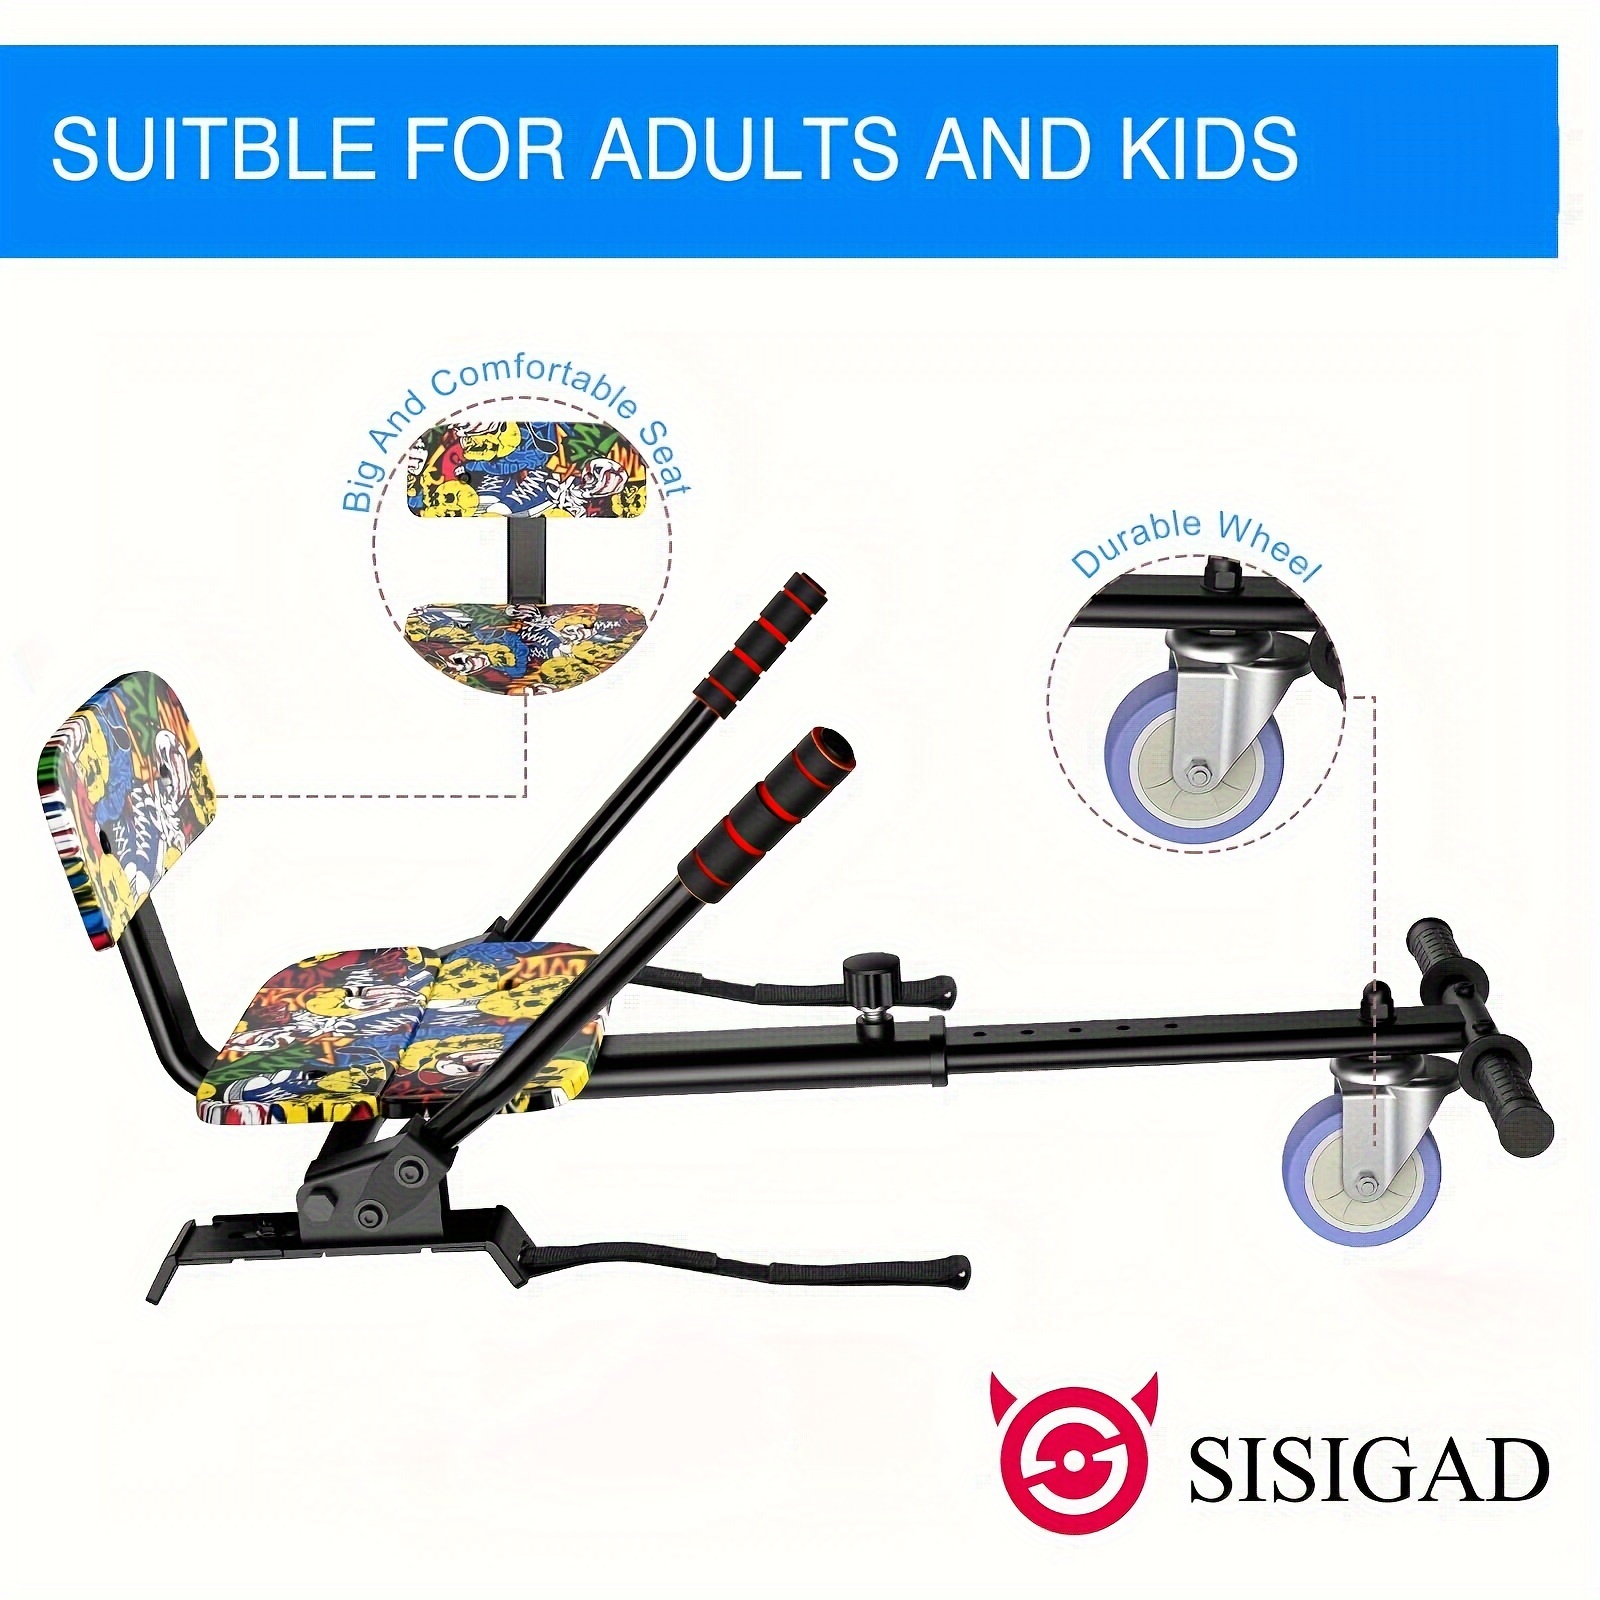 

Sisigad Hoverboard Kart Seat Attachment With Adjustable Frame Compatible With 6.5" 8" 8.5" 10" 2 Wheel Self Balancing Scooter, Graffiti